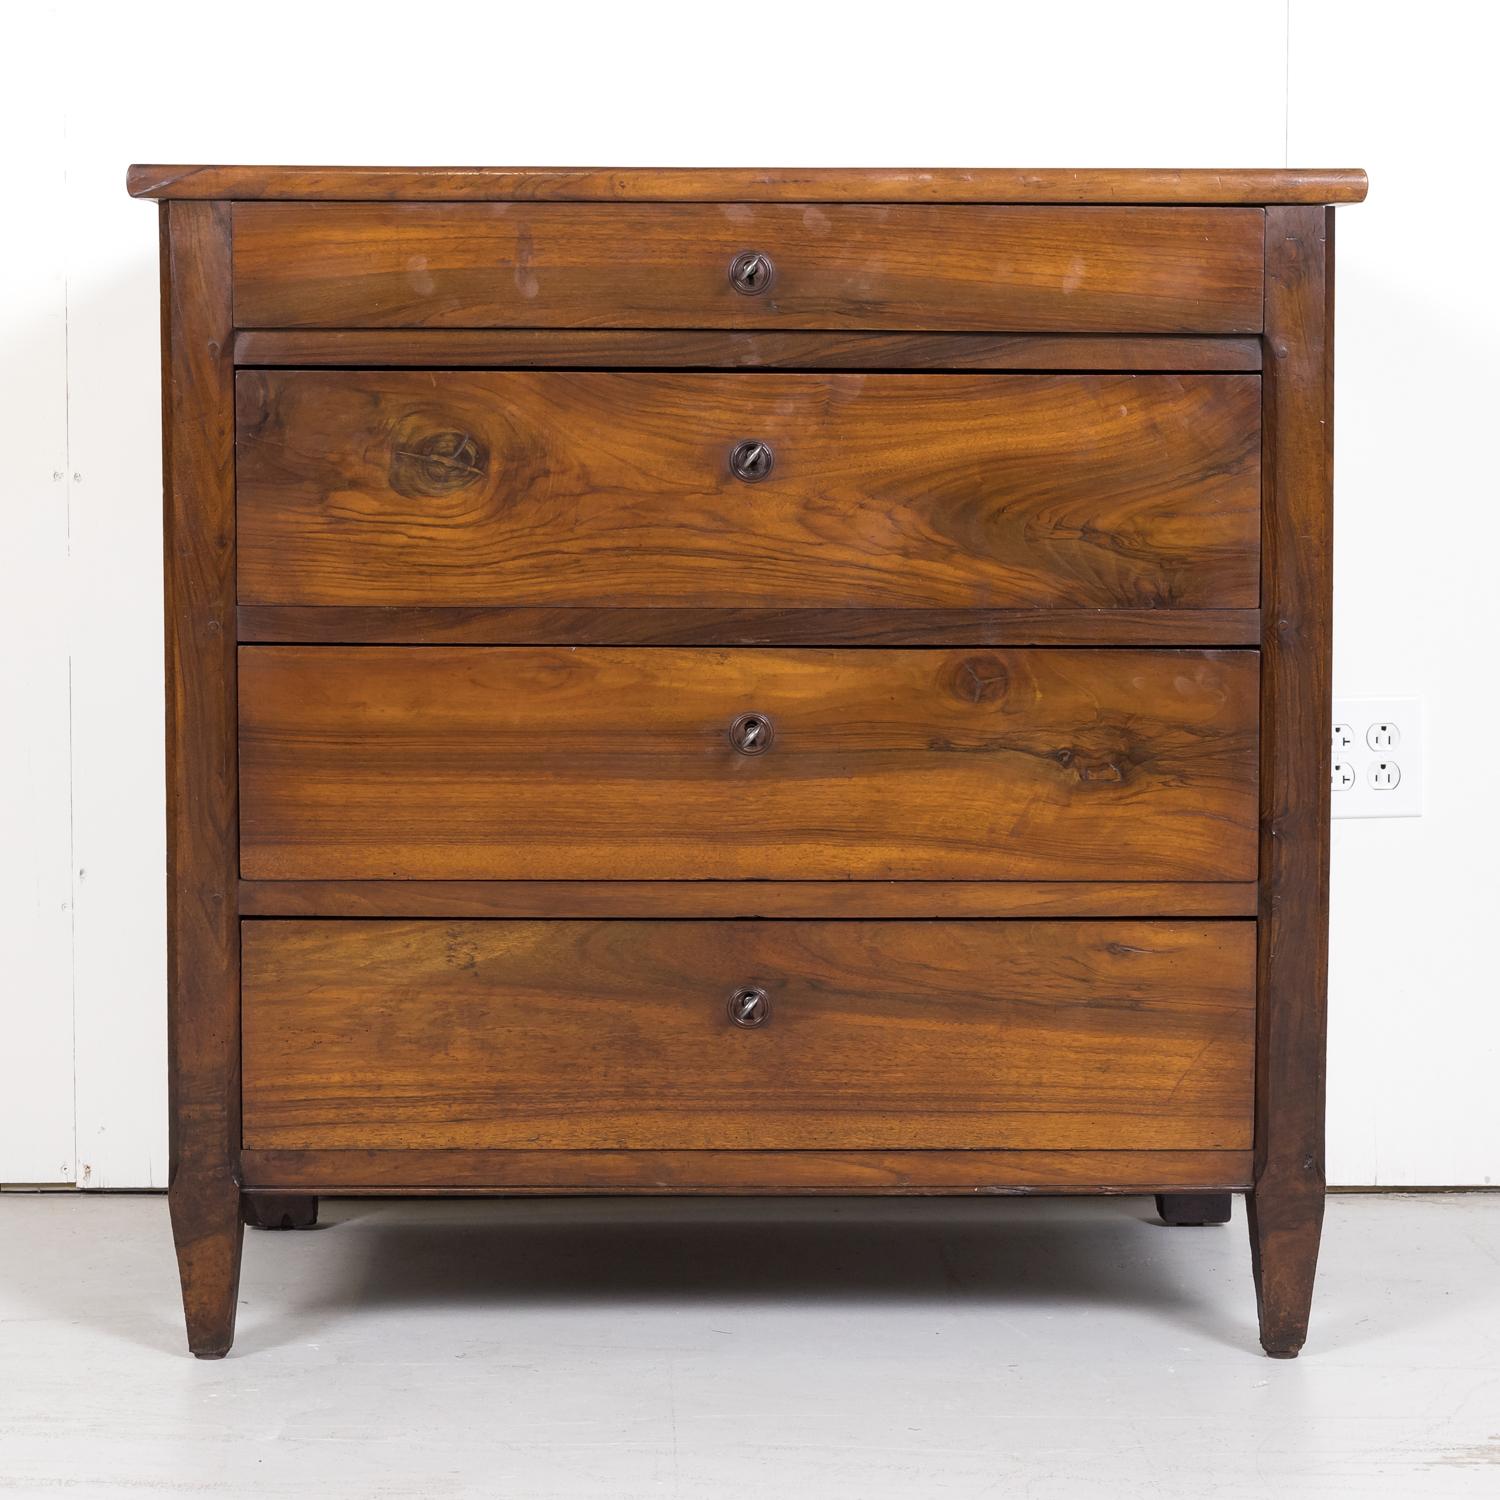 Late 19th Century 19th Century French Louis XVI Style Four-Drawer Walnut Commode